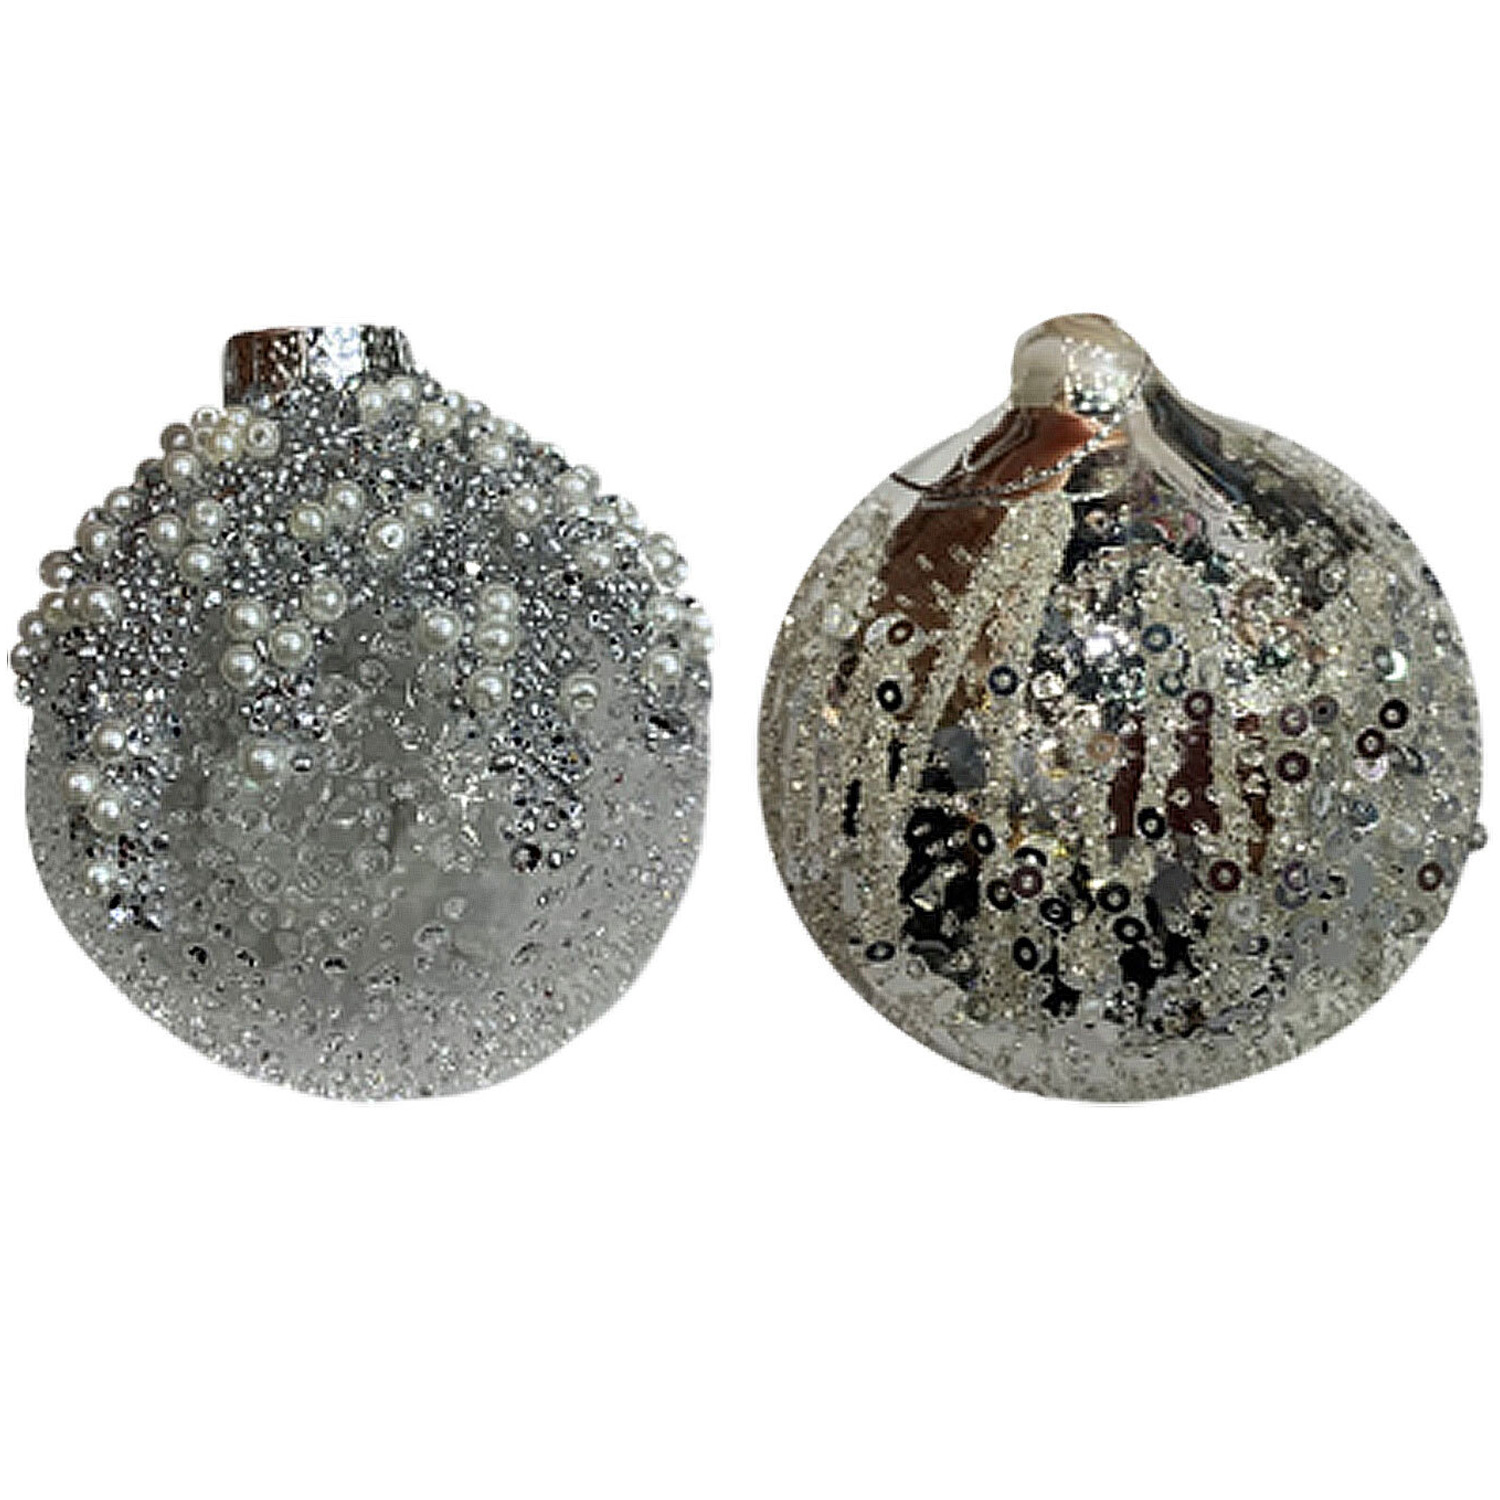 Single Frosted Fairytale Jewelled Frosted Bauble in Assorted styles Image